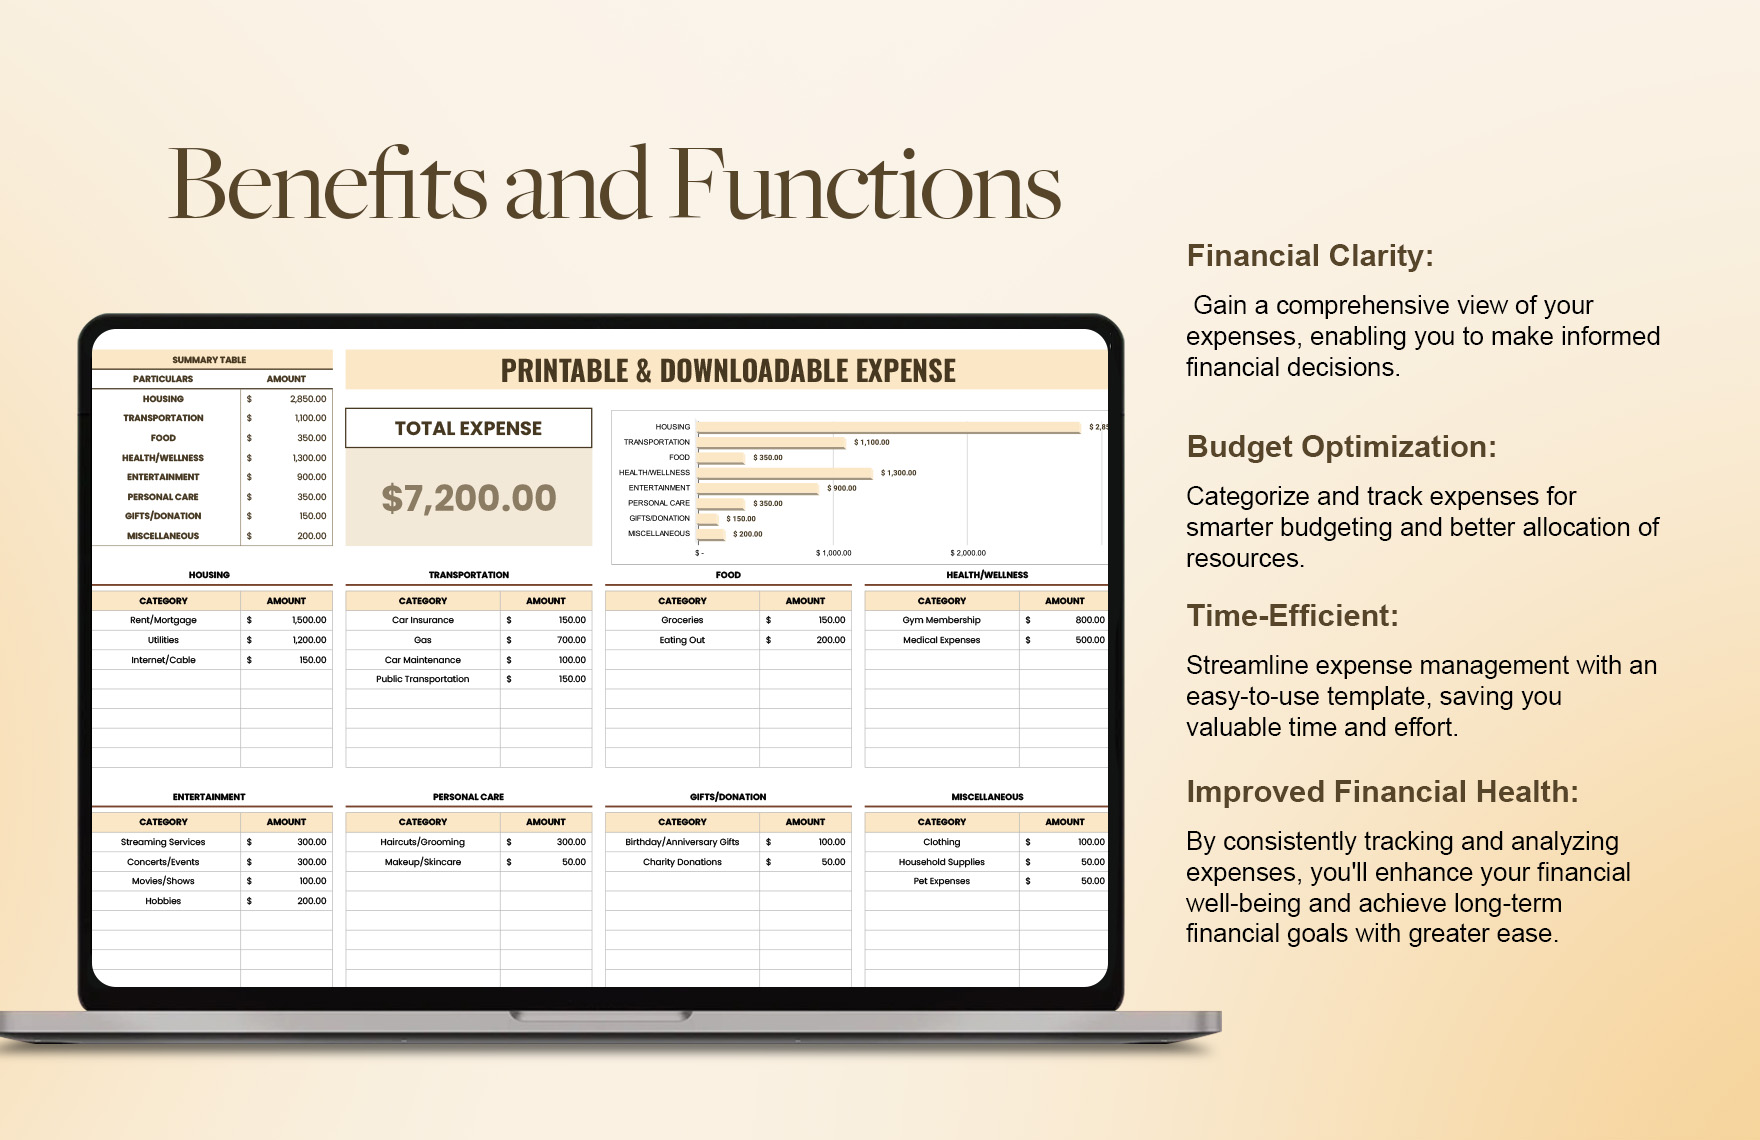 Printable & Downloadable Expense Template